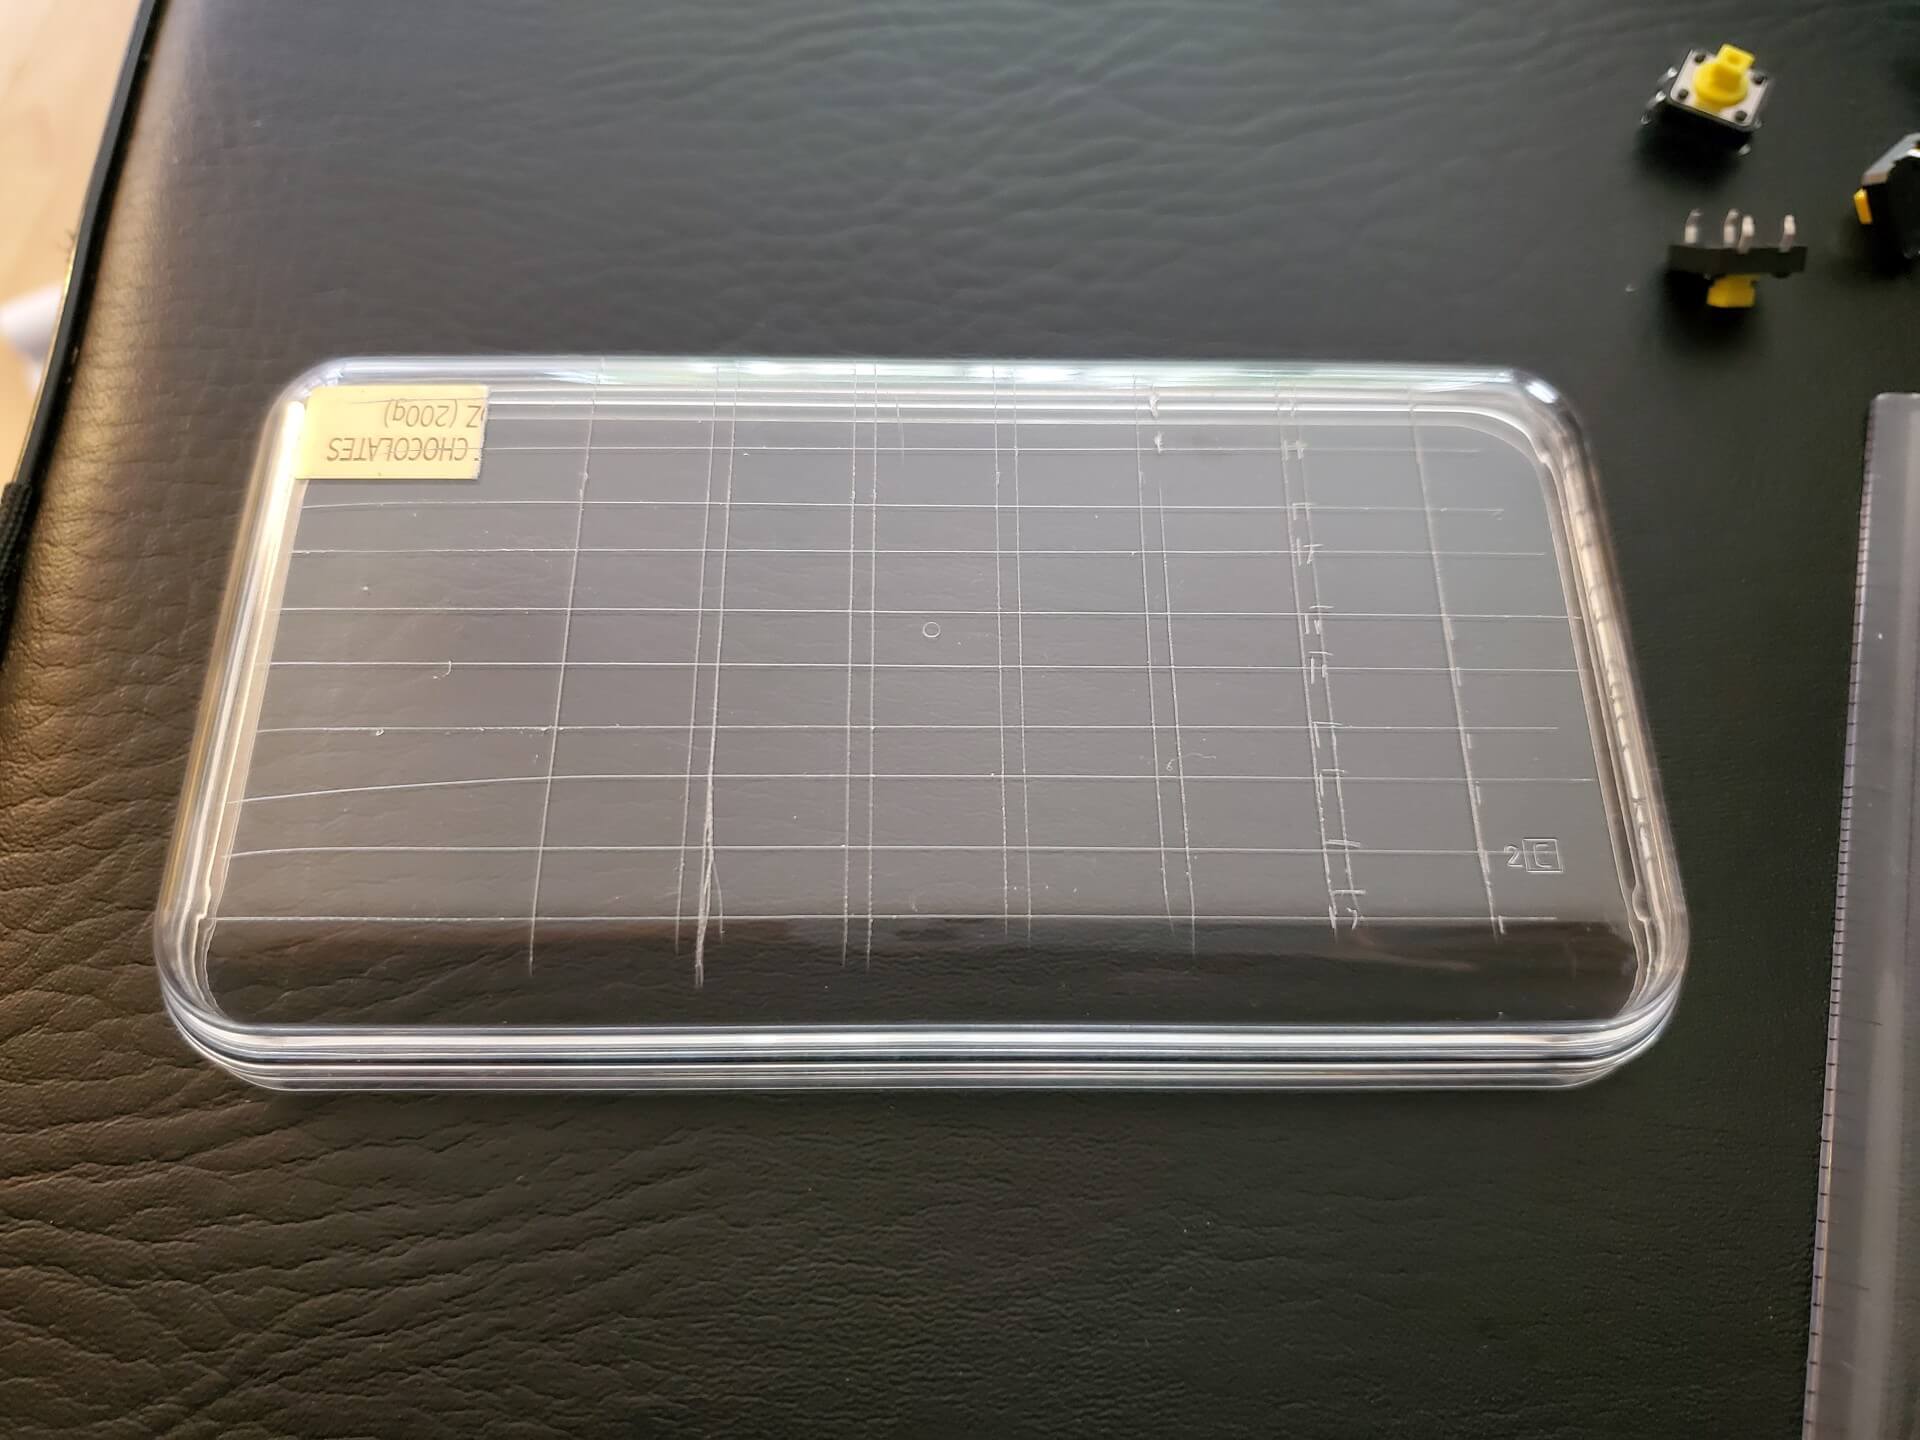 Plastic box lid marked with a knife